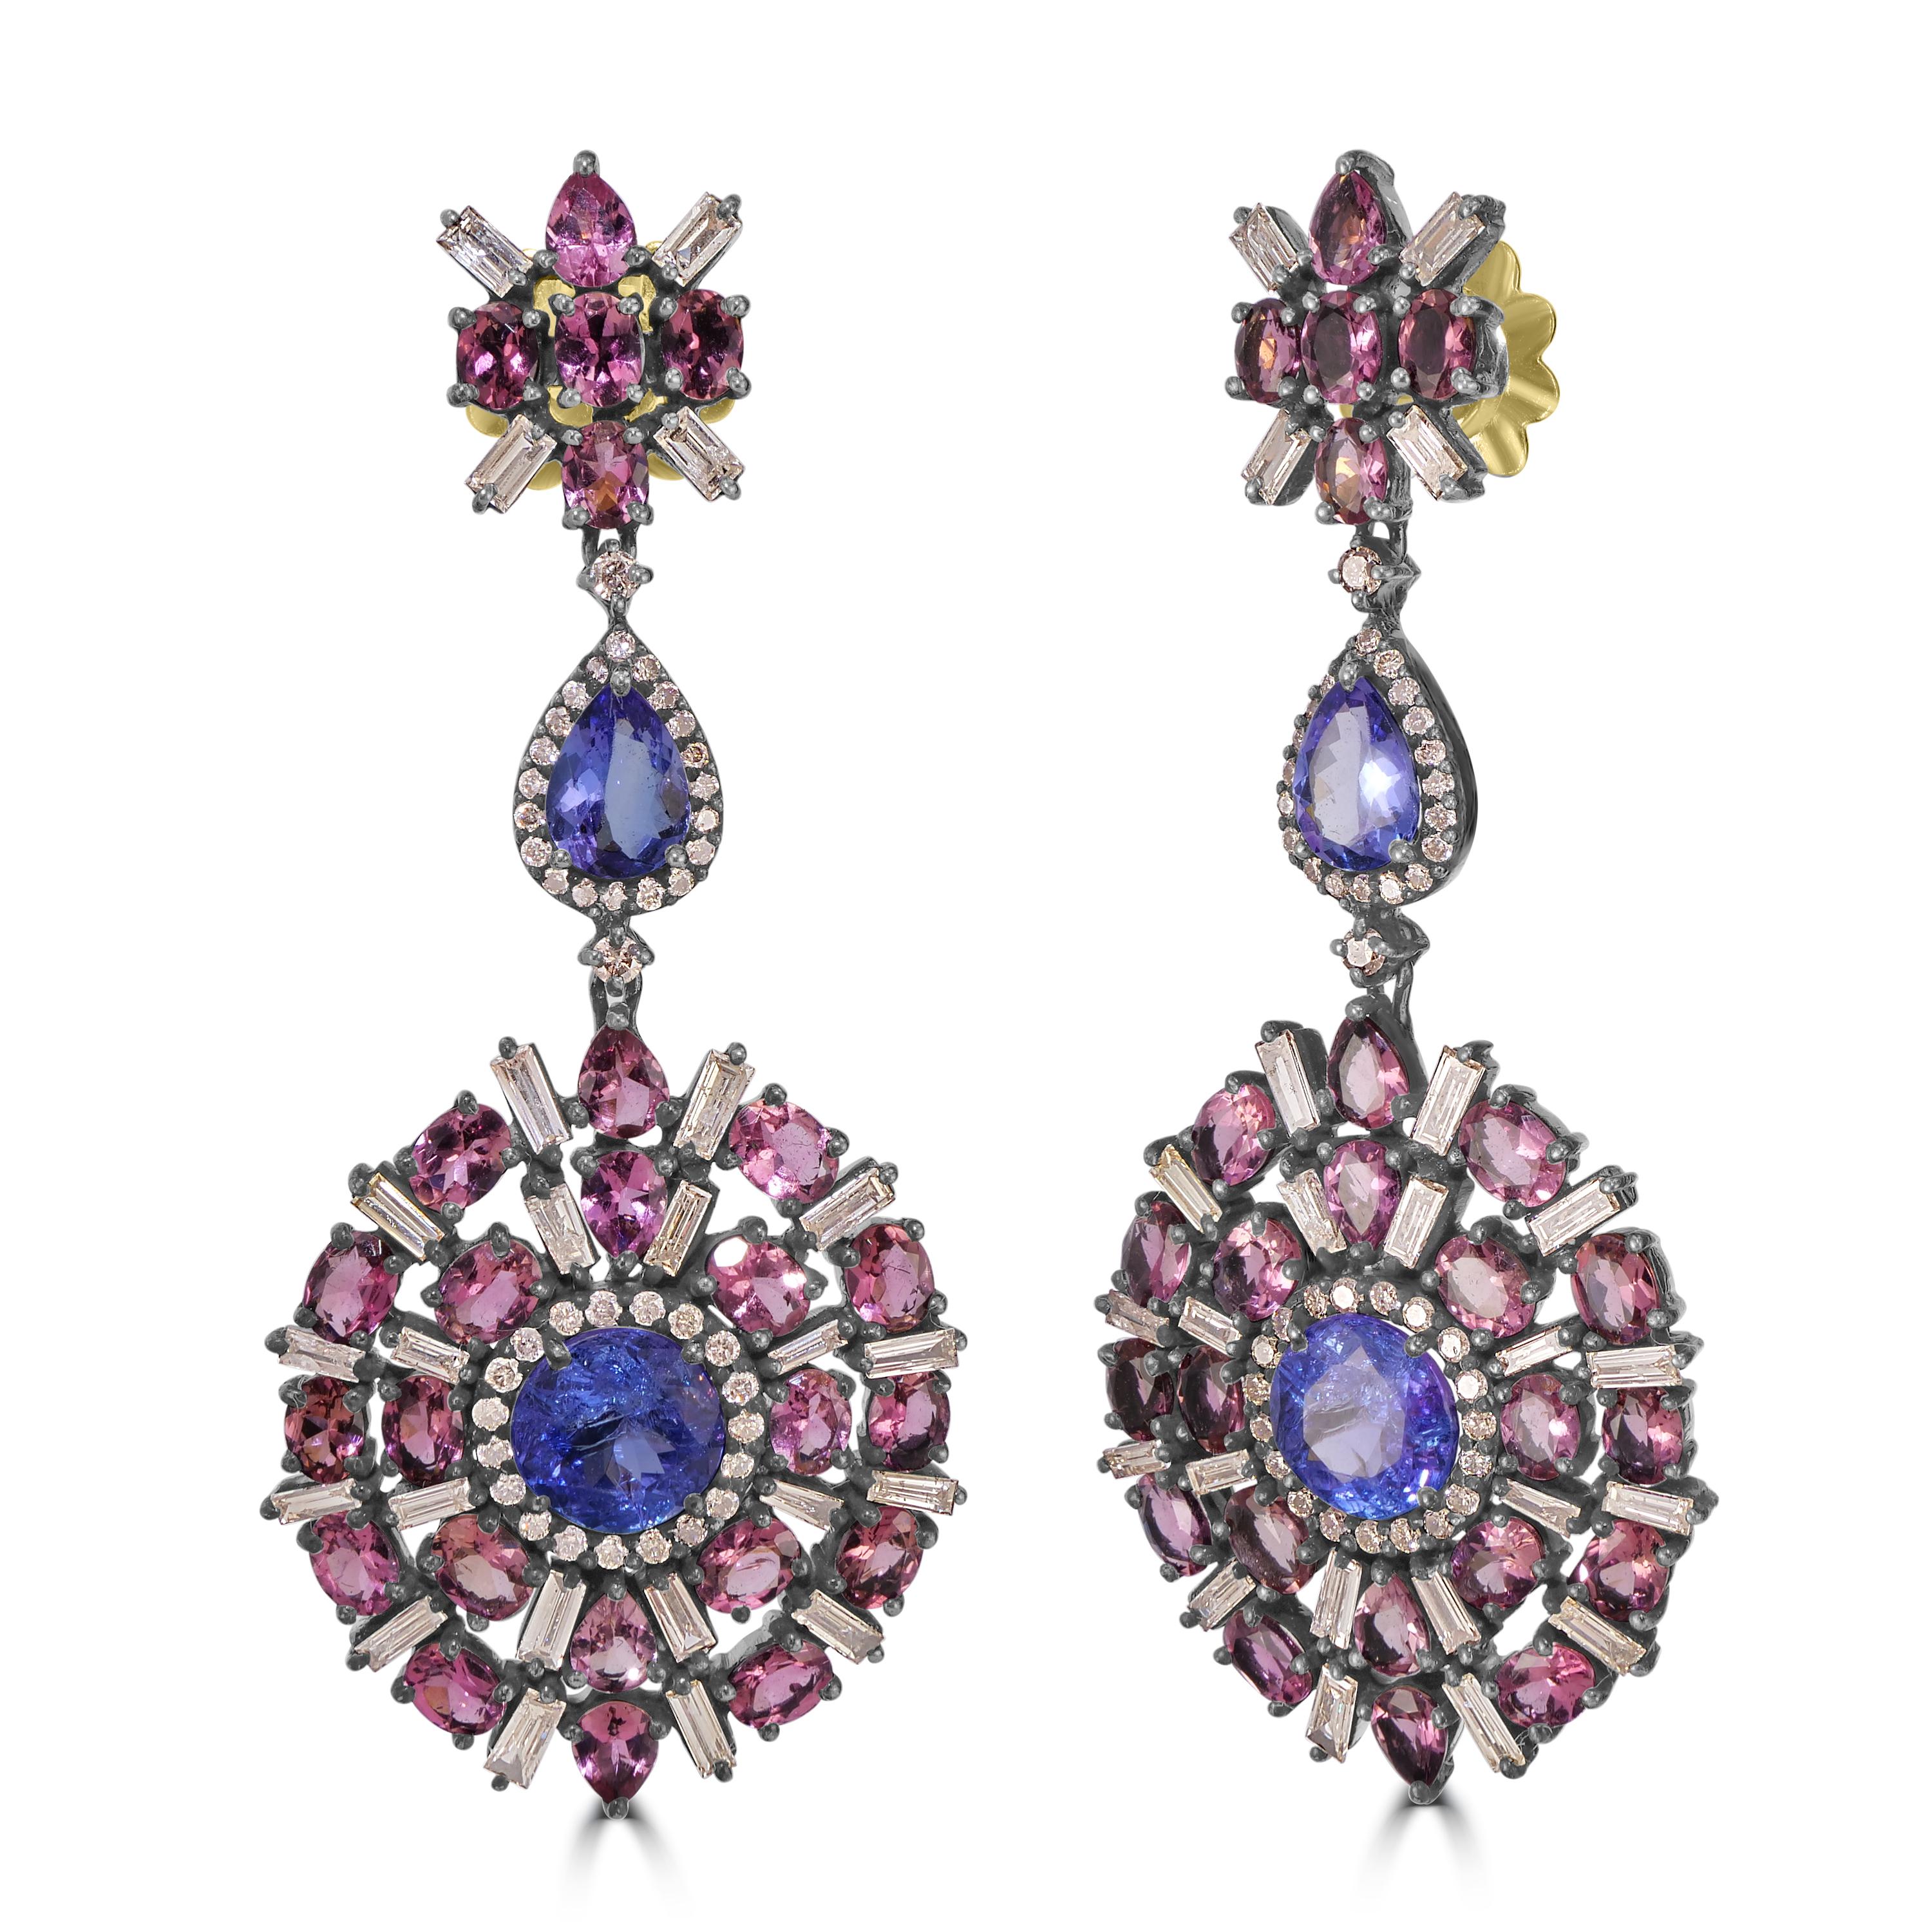 Indulge in the allure of timeless sophistication with our Victorian 14.54 Cttw. Tanzanite, Tourmaline, and Diamond Dangle Earrings, a captivating expression of refined craftsmanship and exquisite gemstones.

The circular drop at the heart of these